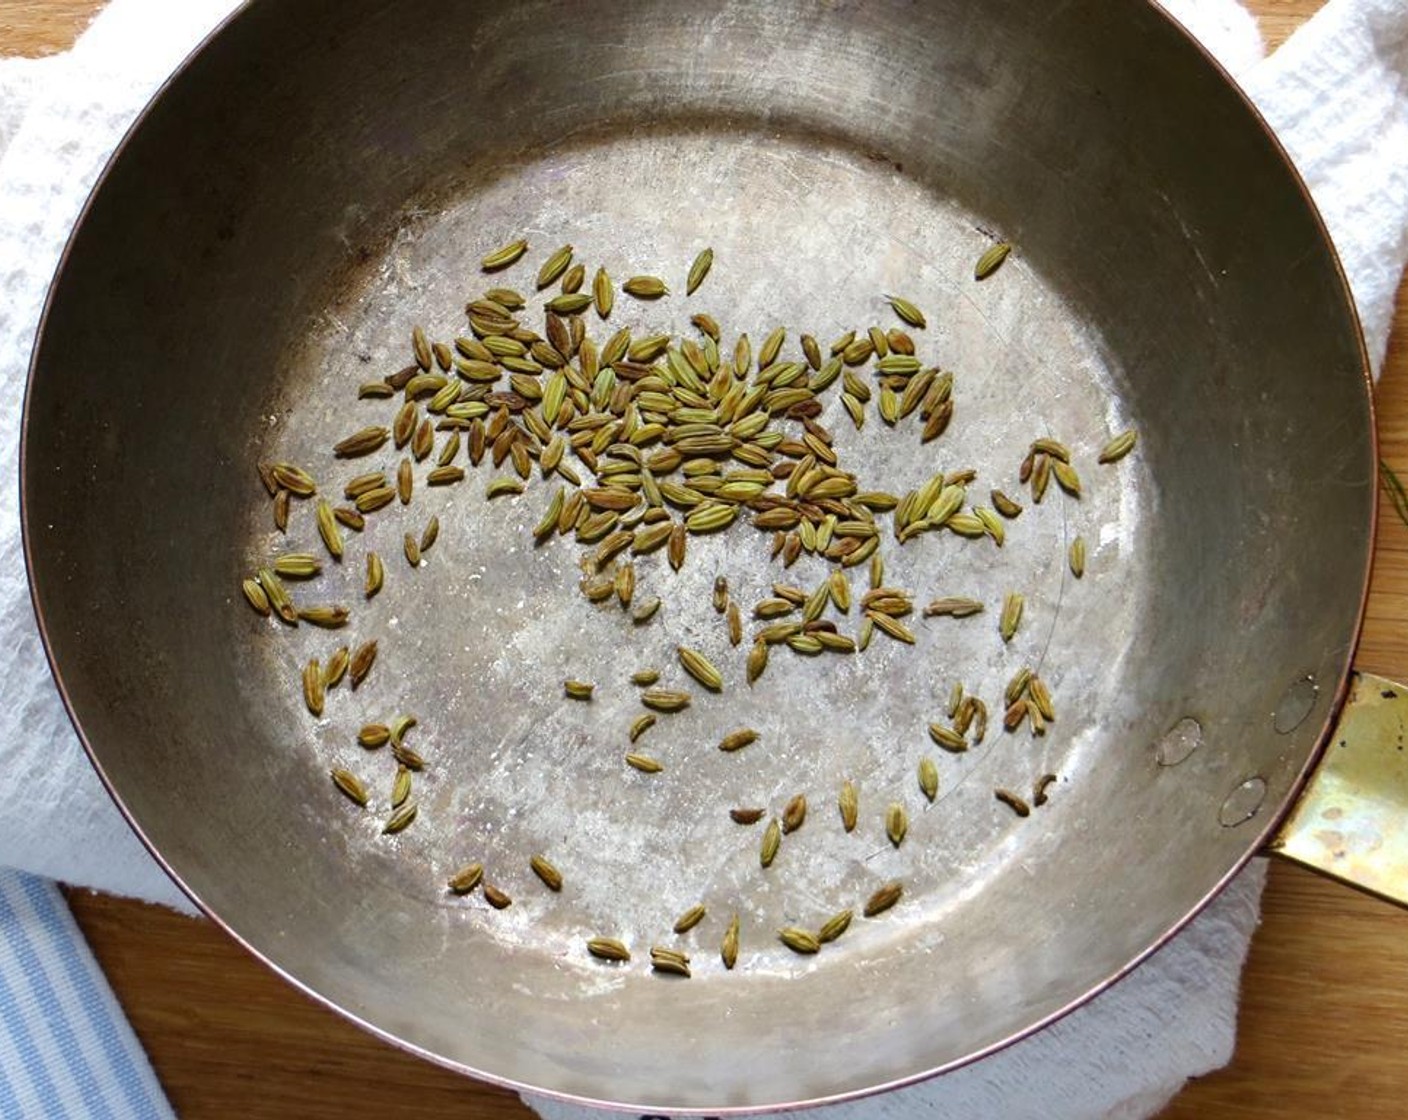 step 7 In a small skillet, toast the Fennel Seeds (1 tsp) until warm, fragrant, and beginning to pop. Remove from heat and use a mortar and pestle, spice grinder or a heavy rolling pin to crush the seeds.